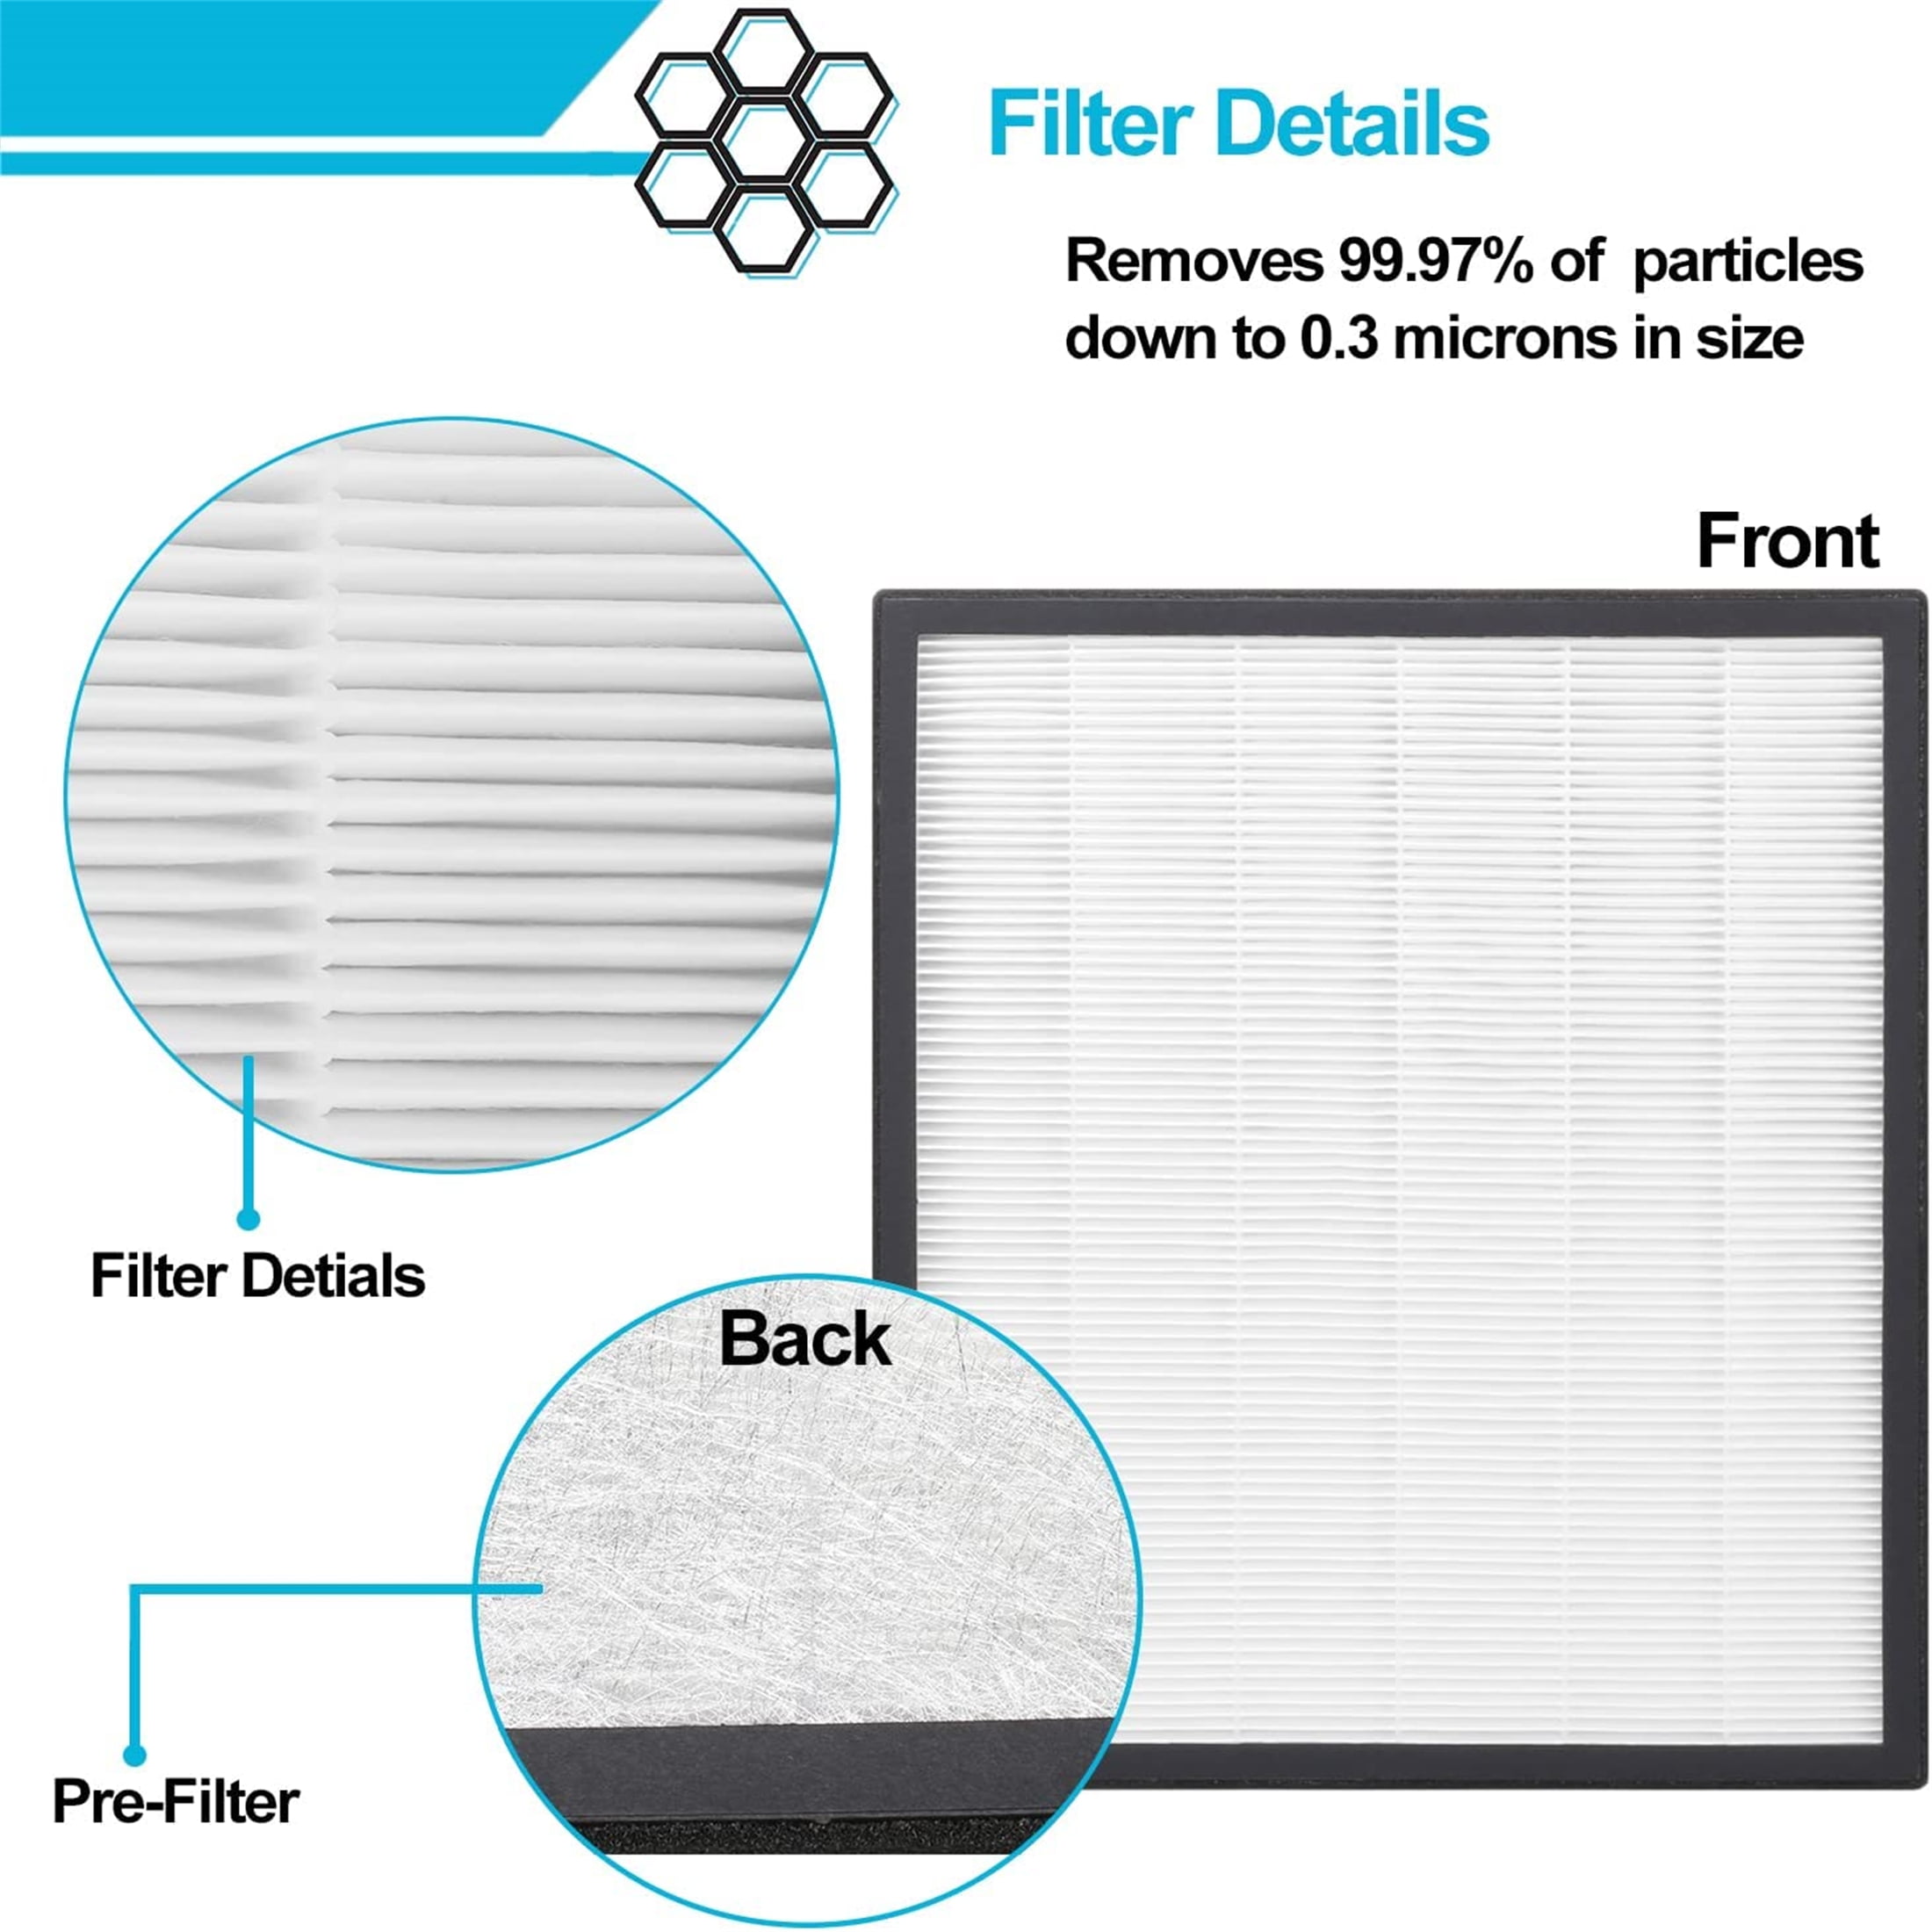  LV-Pur131 Replacement Filters for Levoit LV-Pur131 Air  Purifier, LV-PUR131S Levoit Air Purifier - Part# LV-PUR131-RF - 2 True HEPA  and 2 Carbon Filters : Home & Kitchen